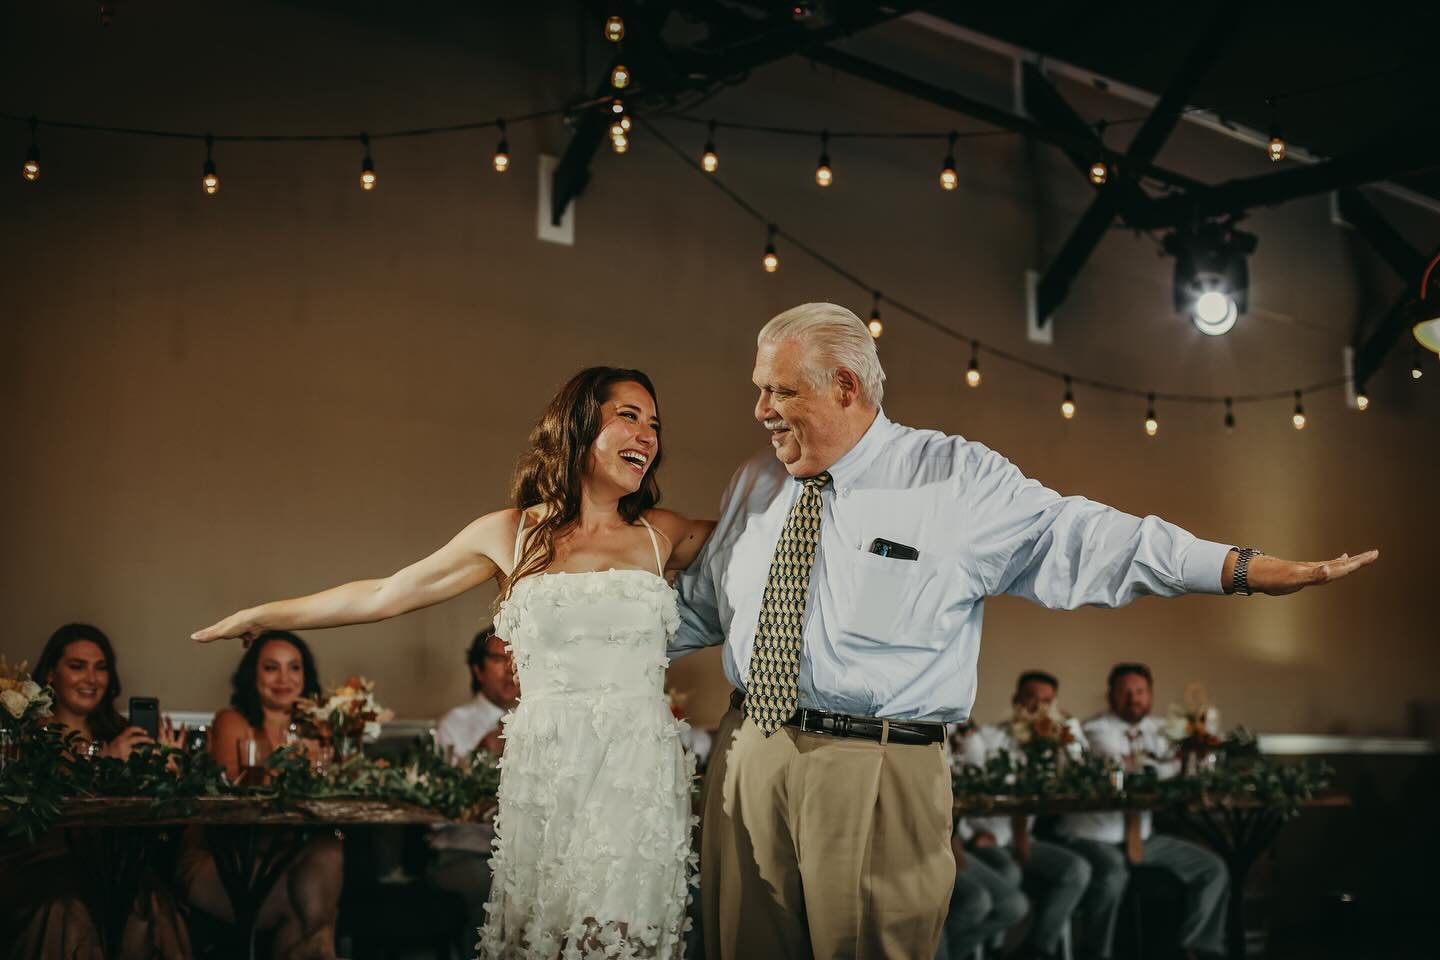 A week of sunshine and I&rsquo;m fully ready for late nights and warm summer dance floors! And don&rsquo;t forget, the best way to get your party going is to lead by example. #weddingvibes #memories

.
.
.

#loml #dancefloor #brideandgroom #cantstopw